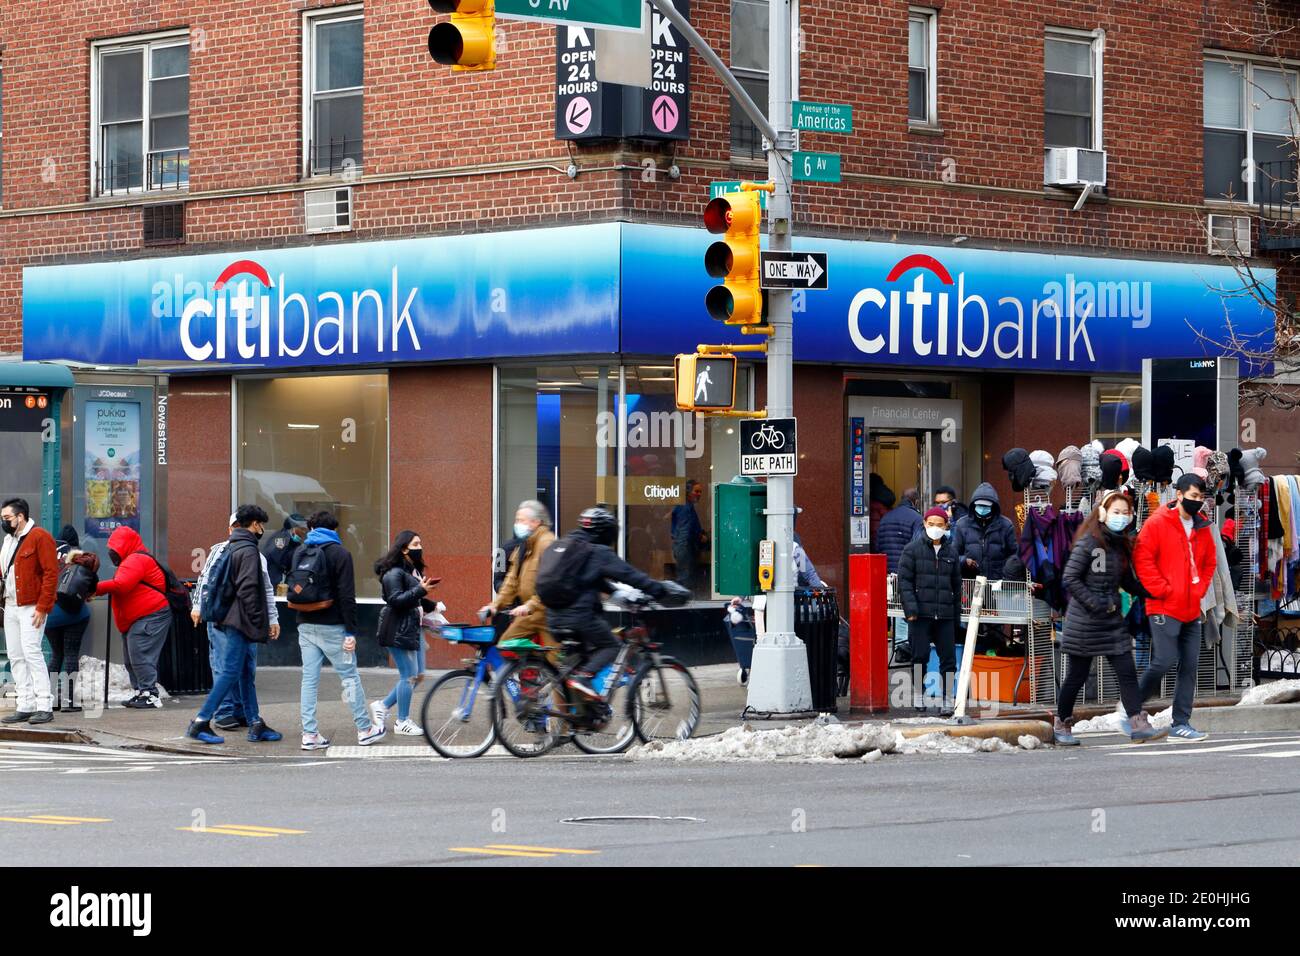 People wearing masks, bicyclists, pedestrians, snow, street vendors, and Citibank on the corner of 6th Ave and W 23rd St in New York, NY. Dec 2020 Stock Photo